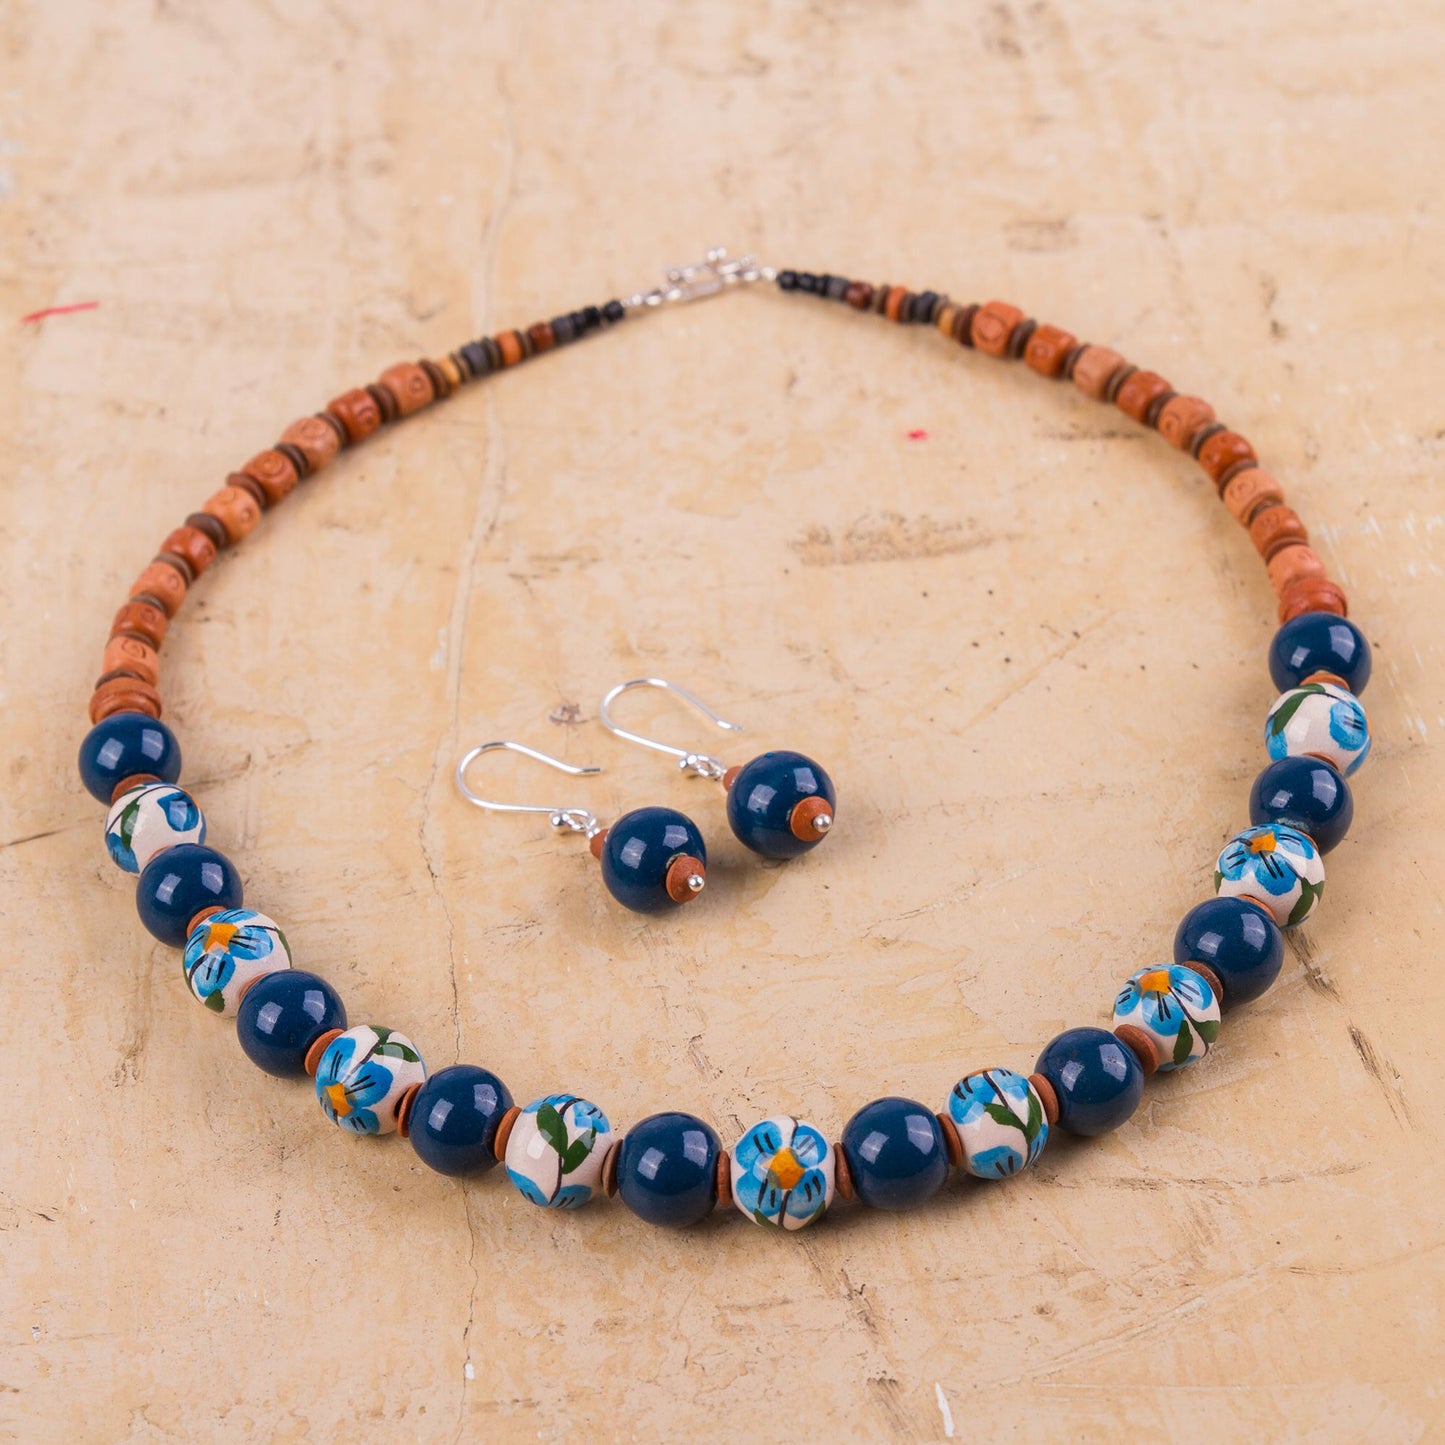 Precious Blue Jewelry Set with Hand Painted Flowers on Ceramic Beads